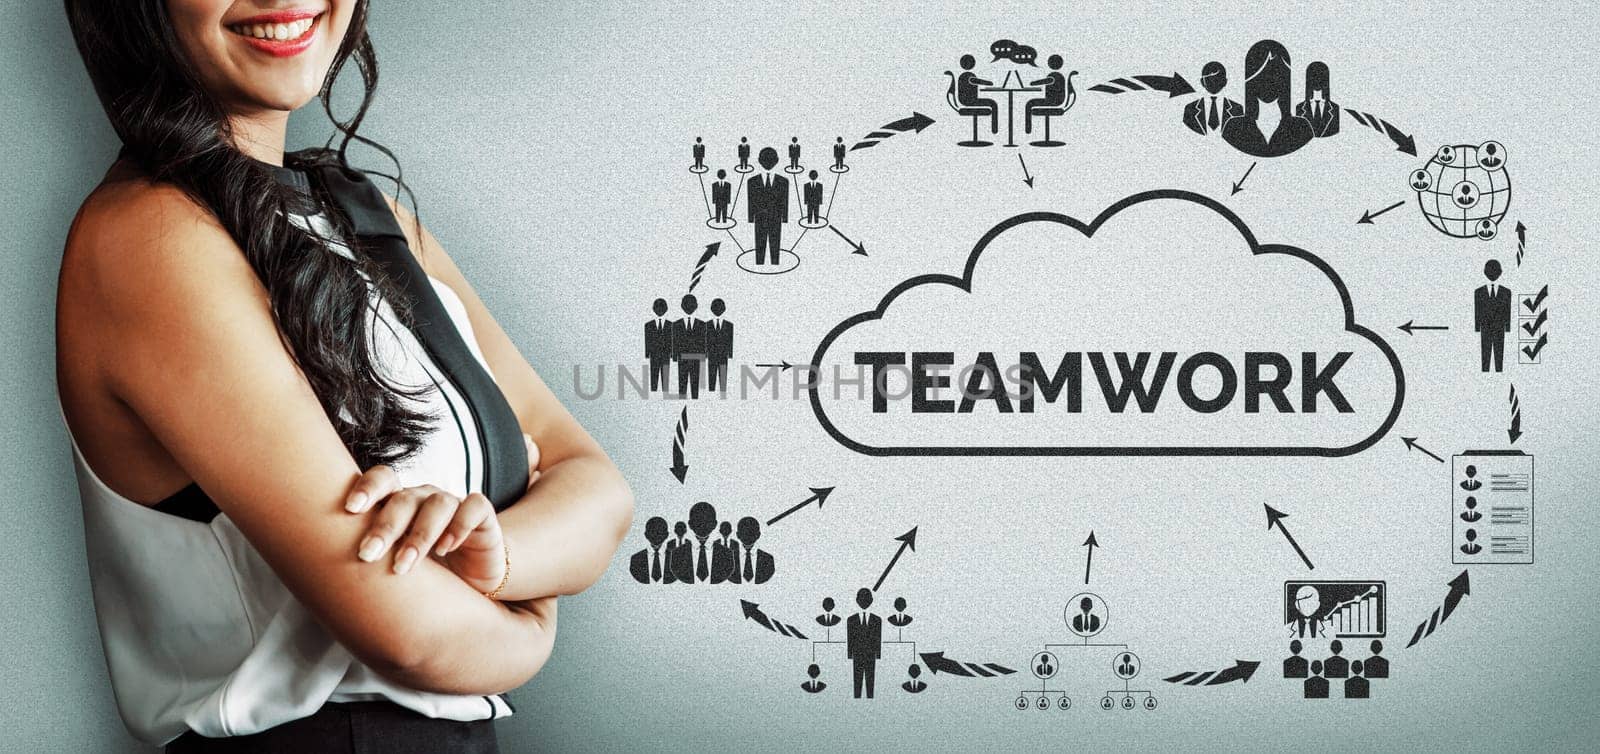 Teamwork and Business Human Resources Concept uds by biancoblue